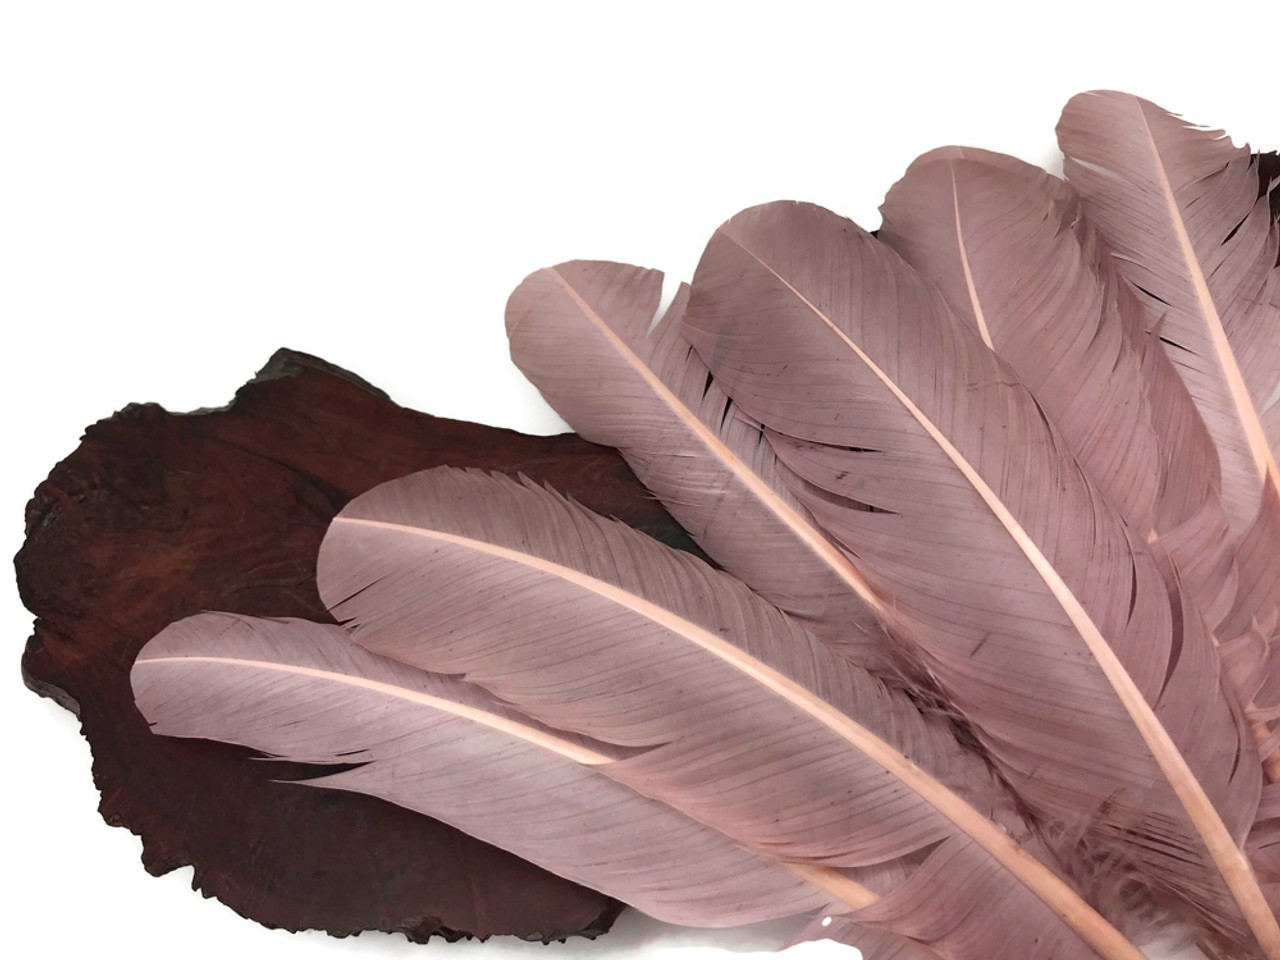 1/4 lb. - Light Brown Turkey Tom Rounds Secondary Wing Quill Wholesale Feathers (Bulk)